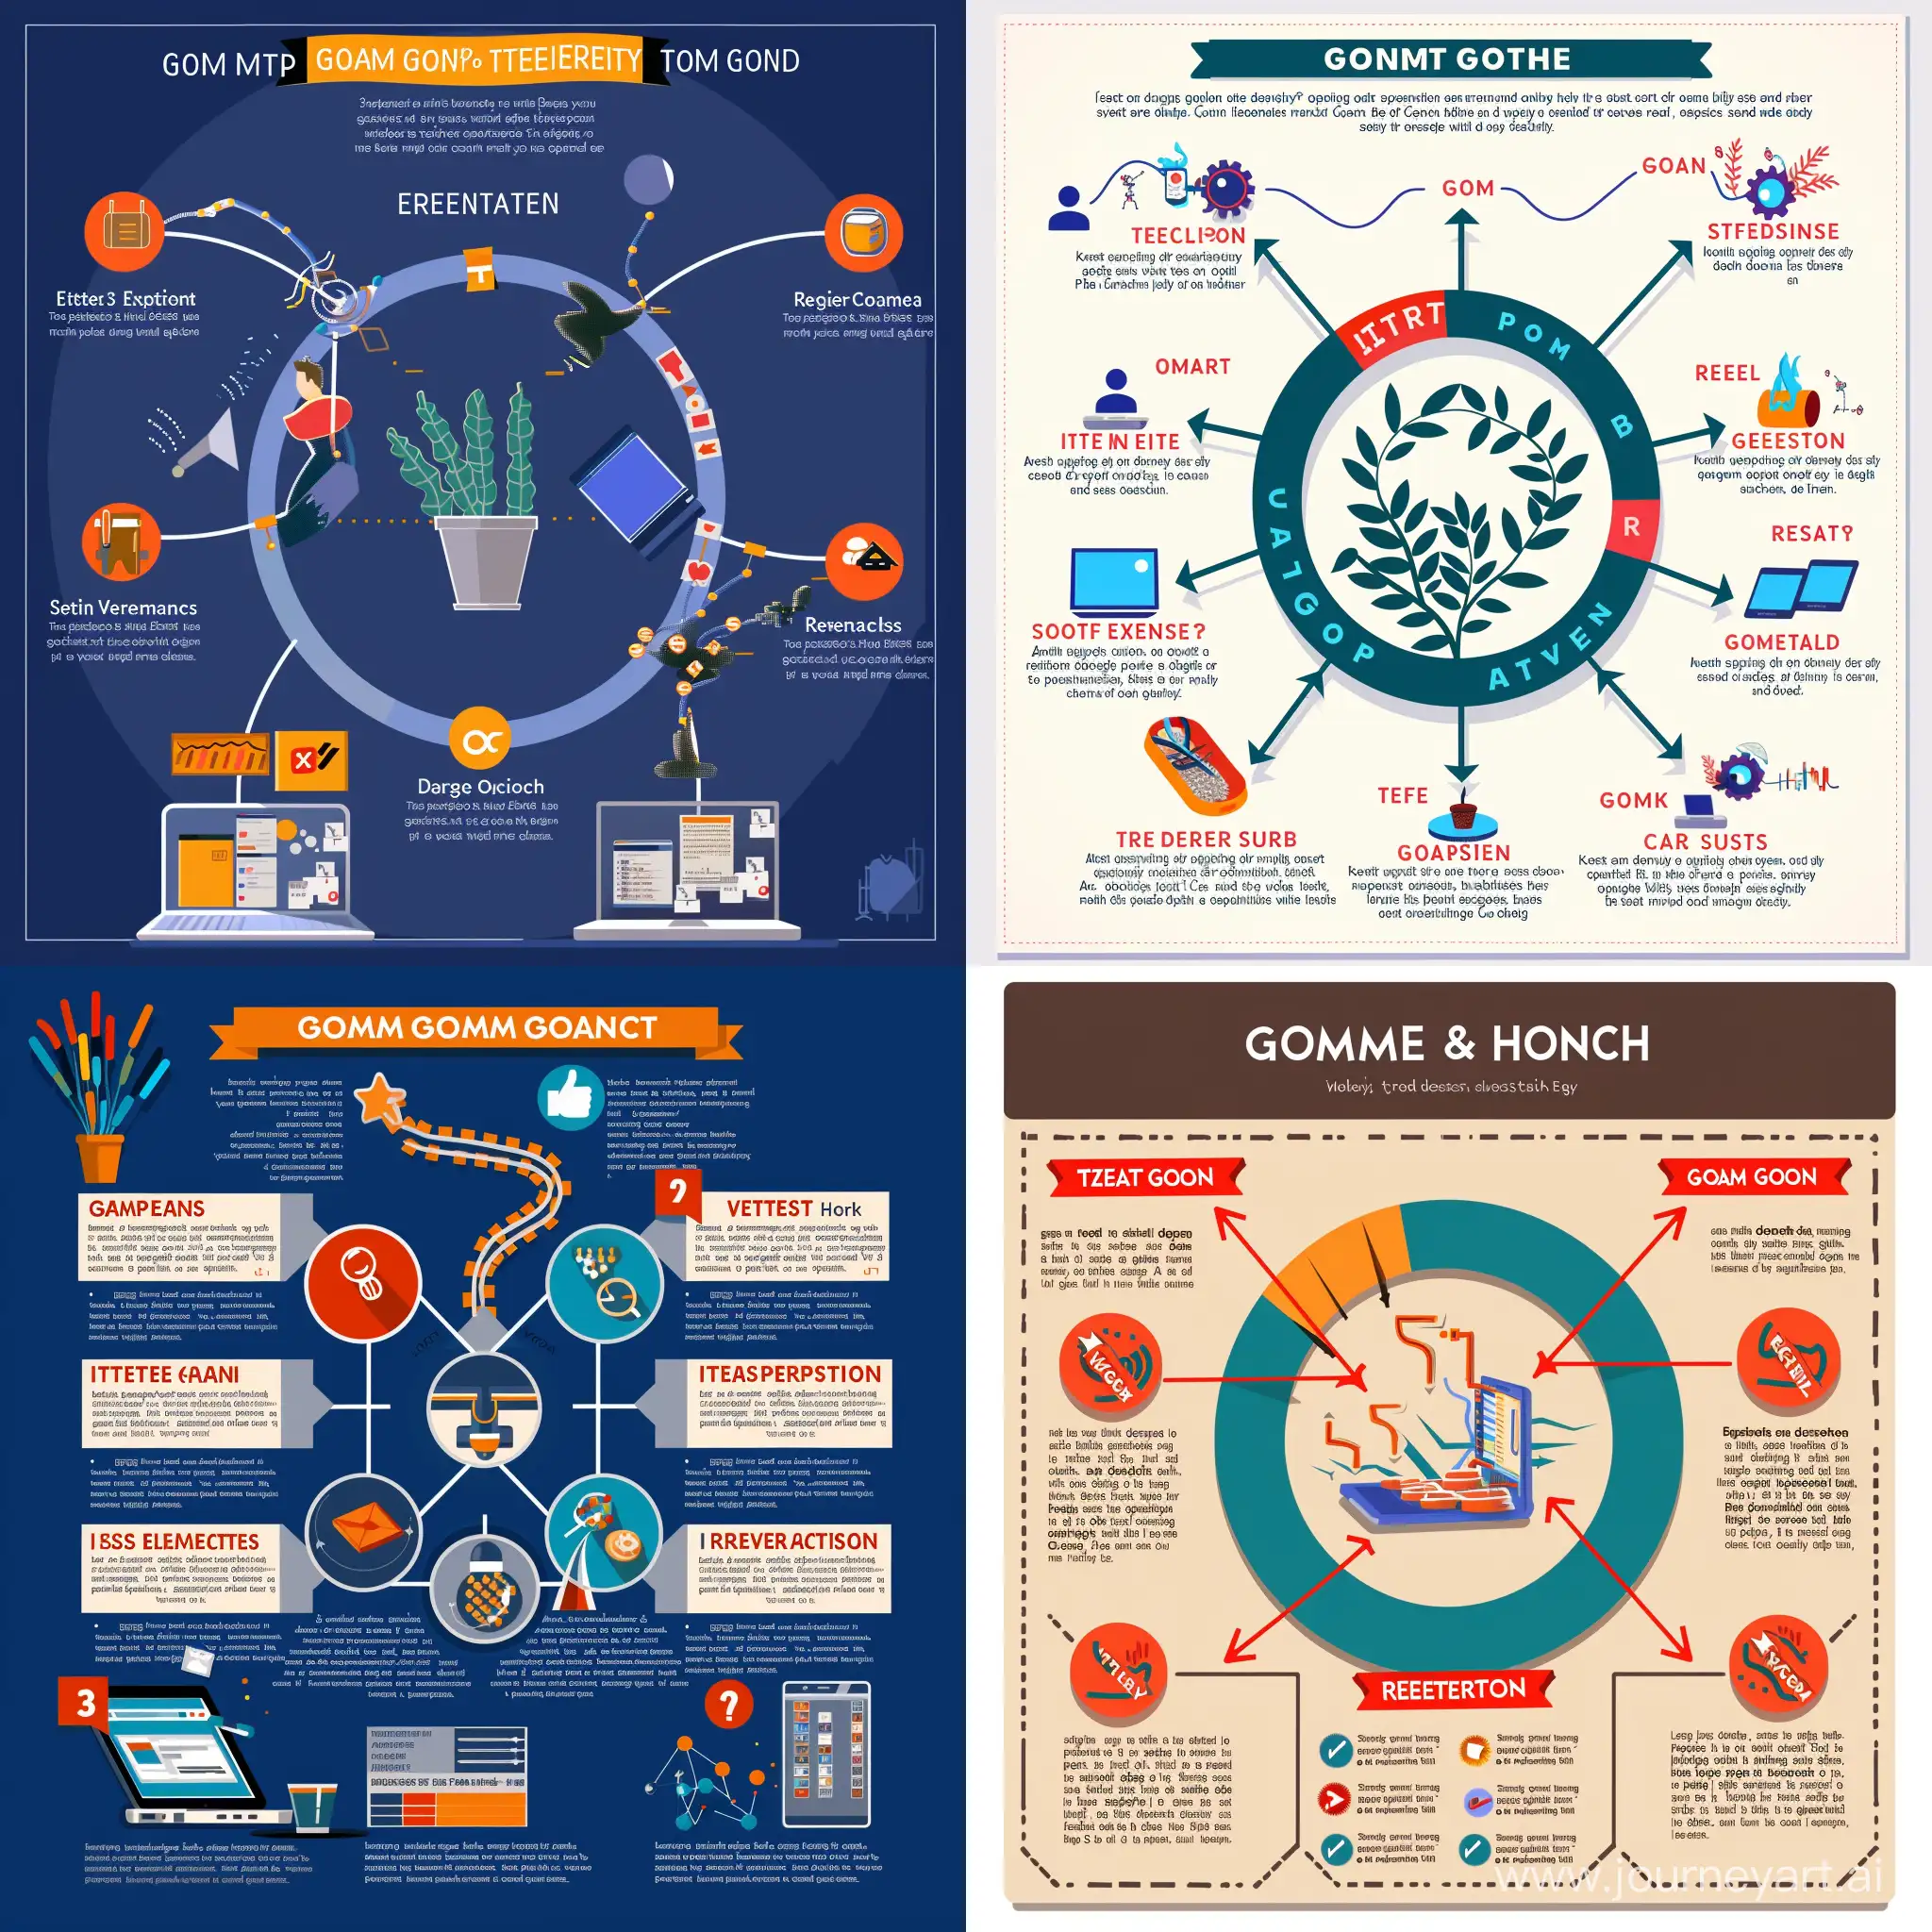 Strategic-Growth-Hacking-Infographic-Goal-Setting-Experiment-Iteration-and-Reevaluation-Cycle